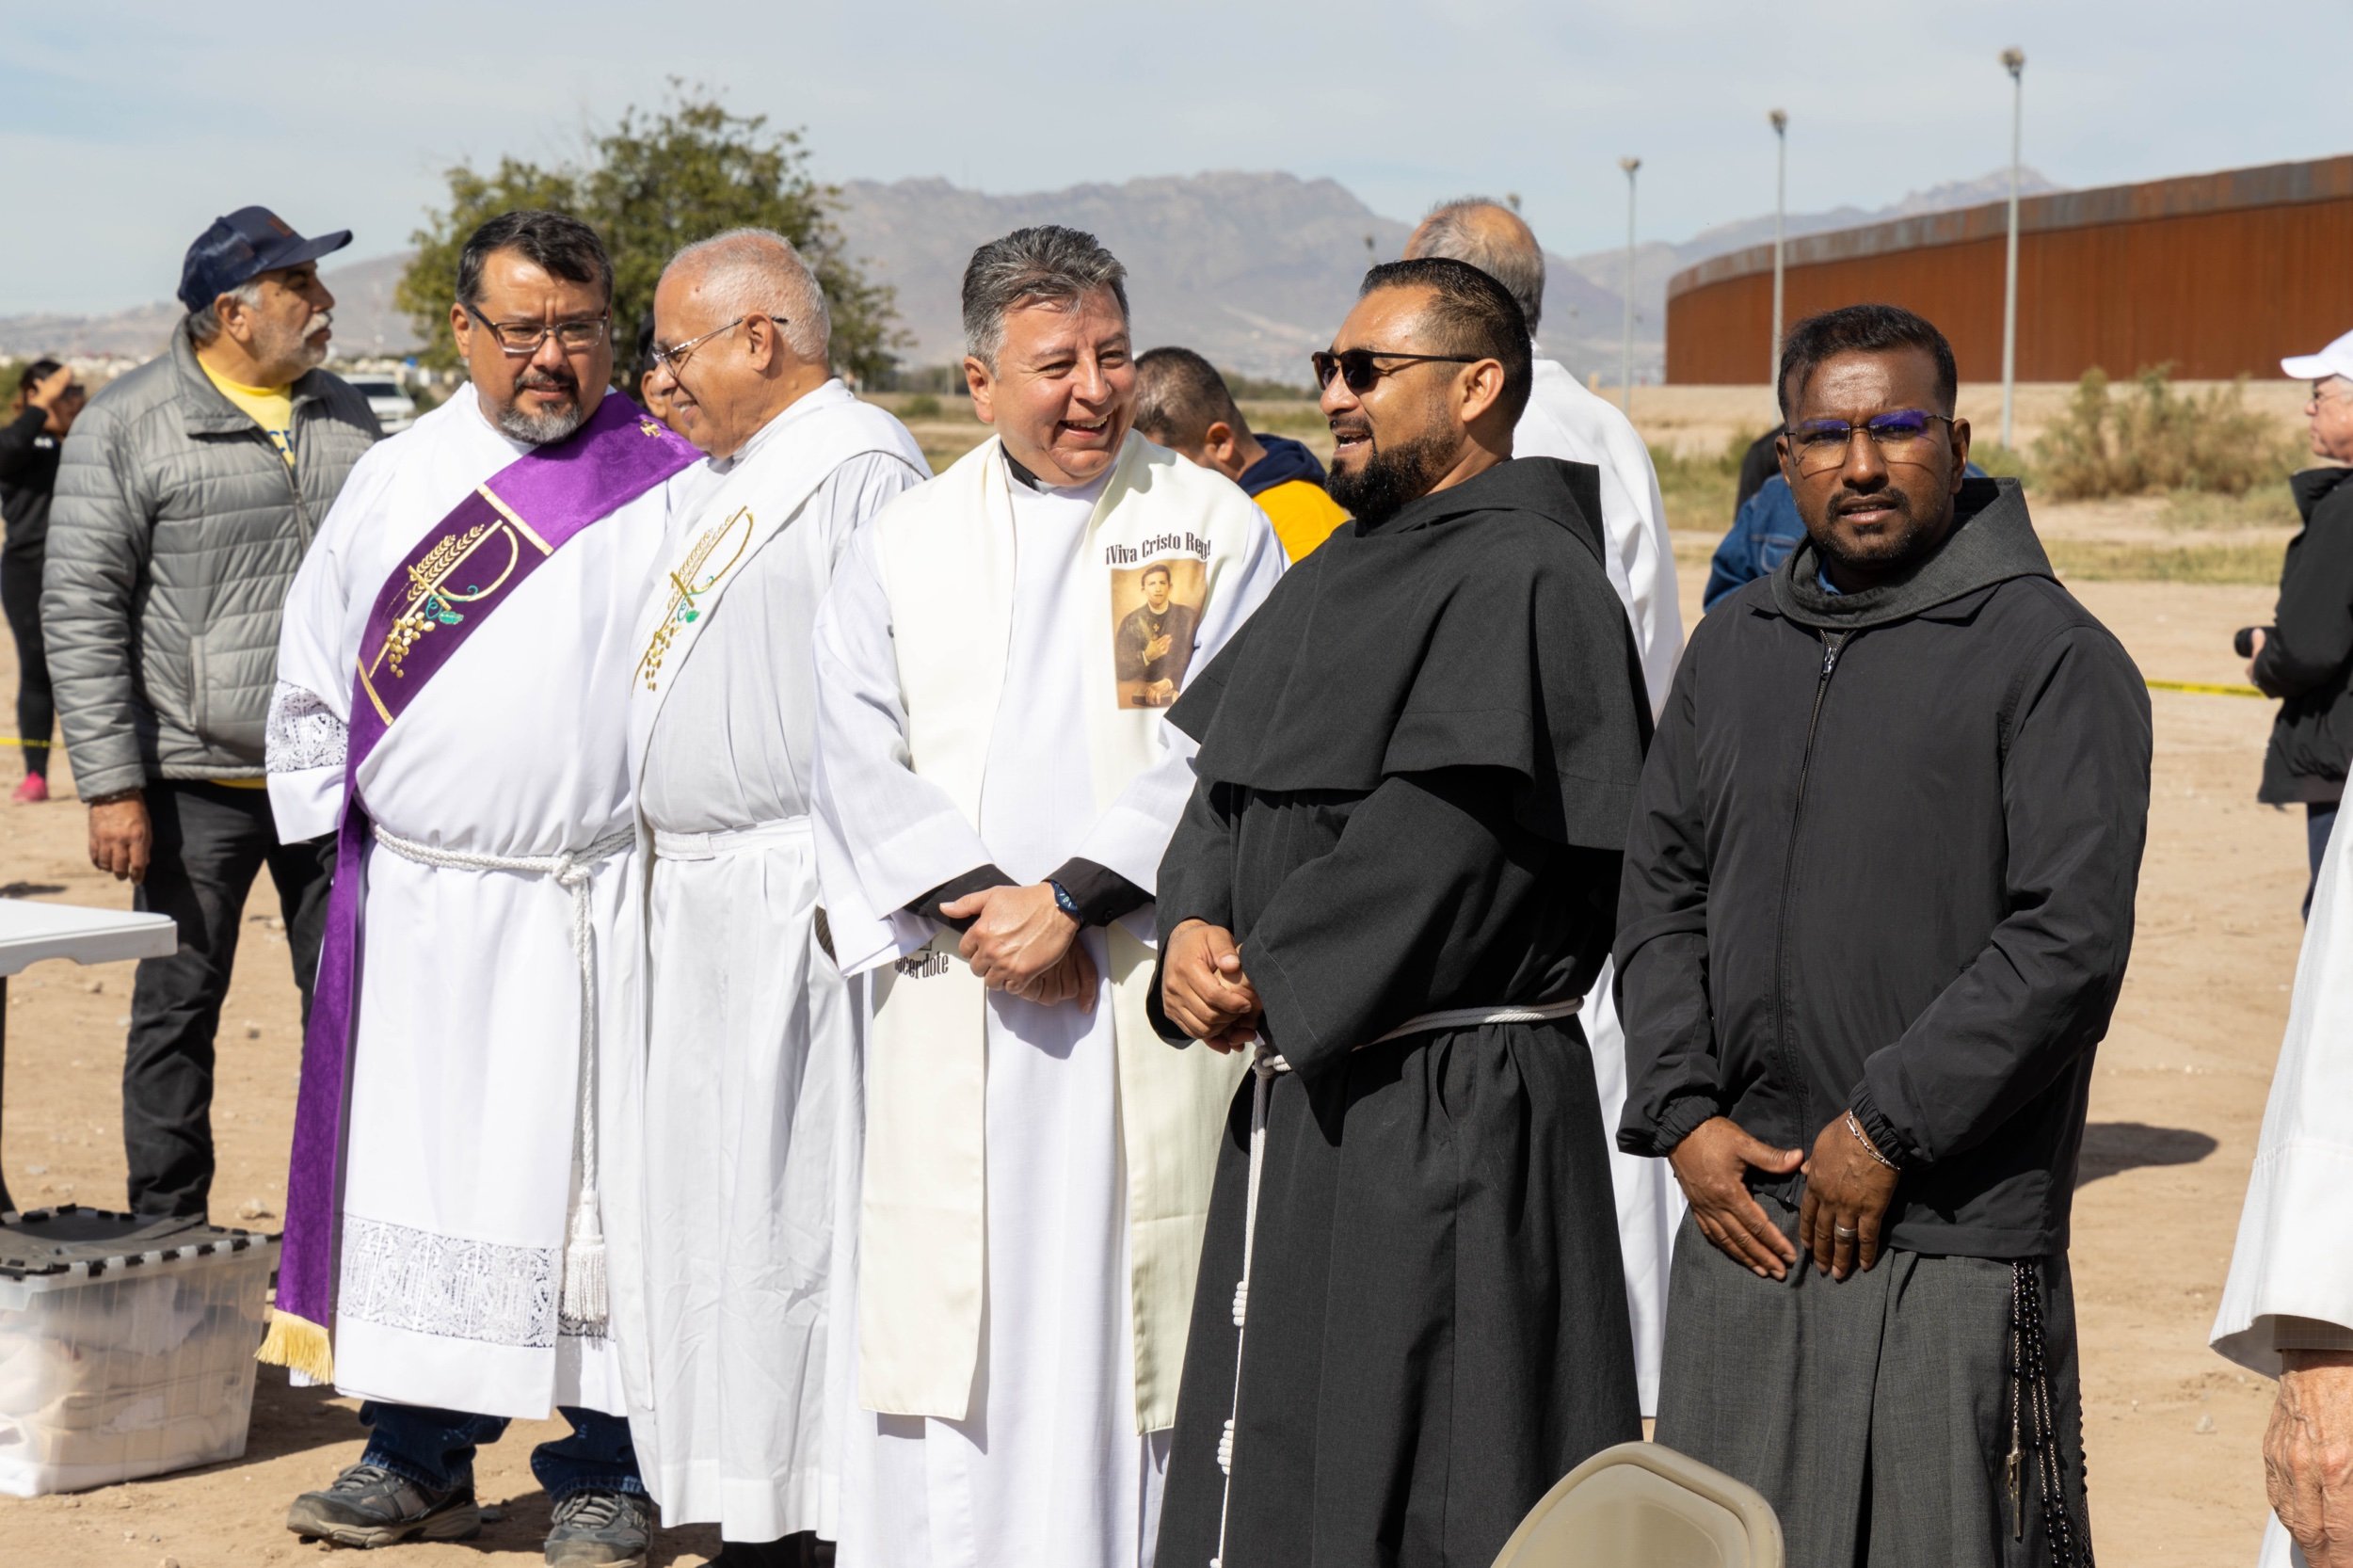 Mass at the Border - Praying for our sister city